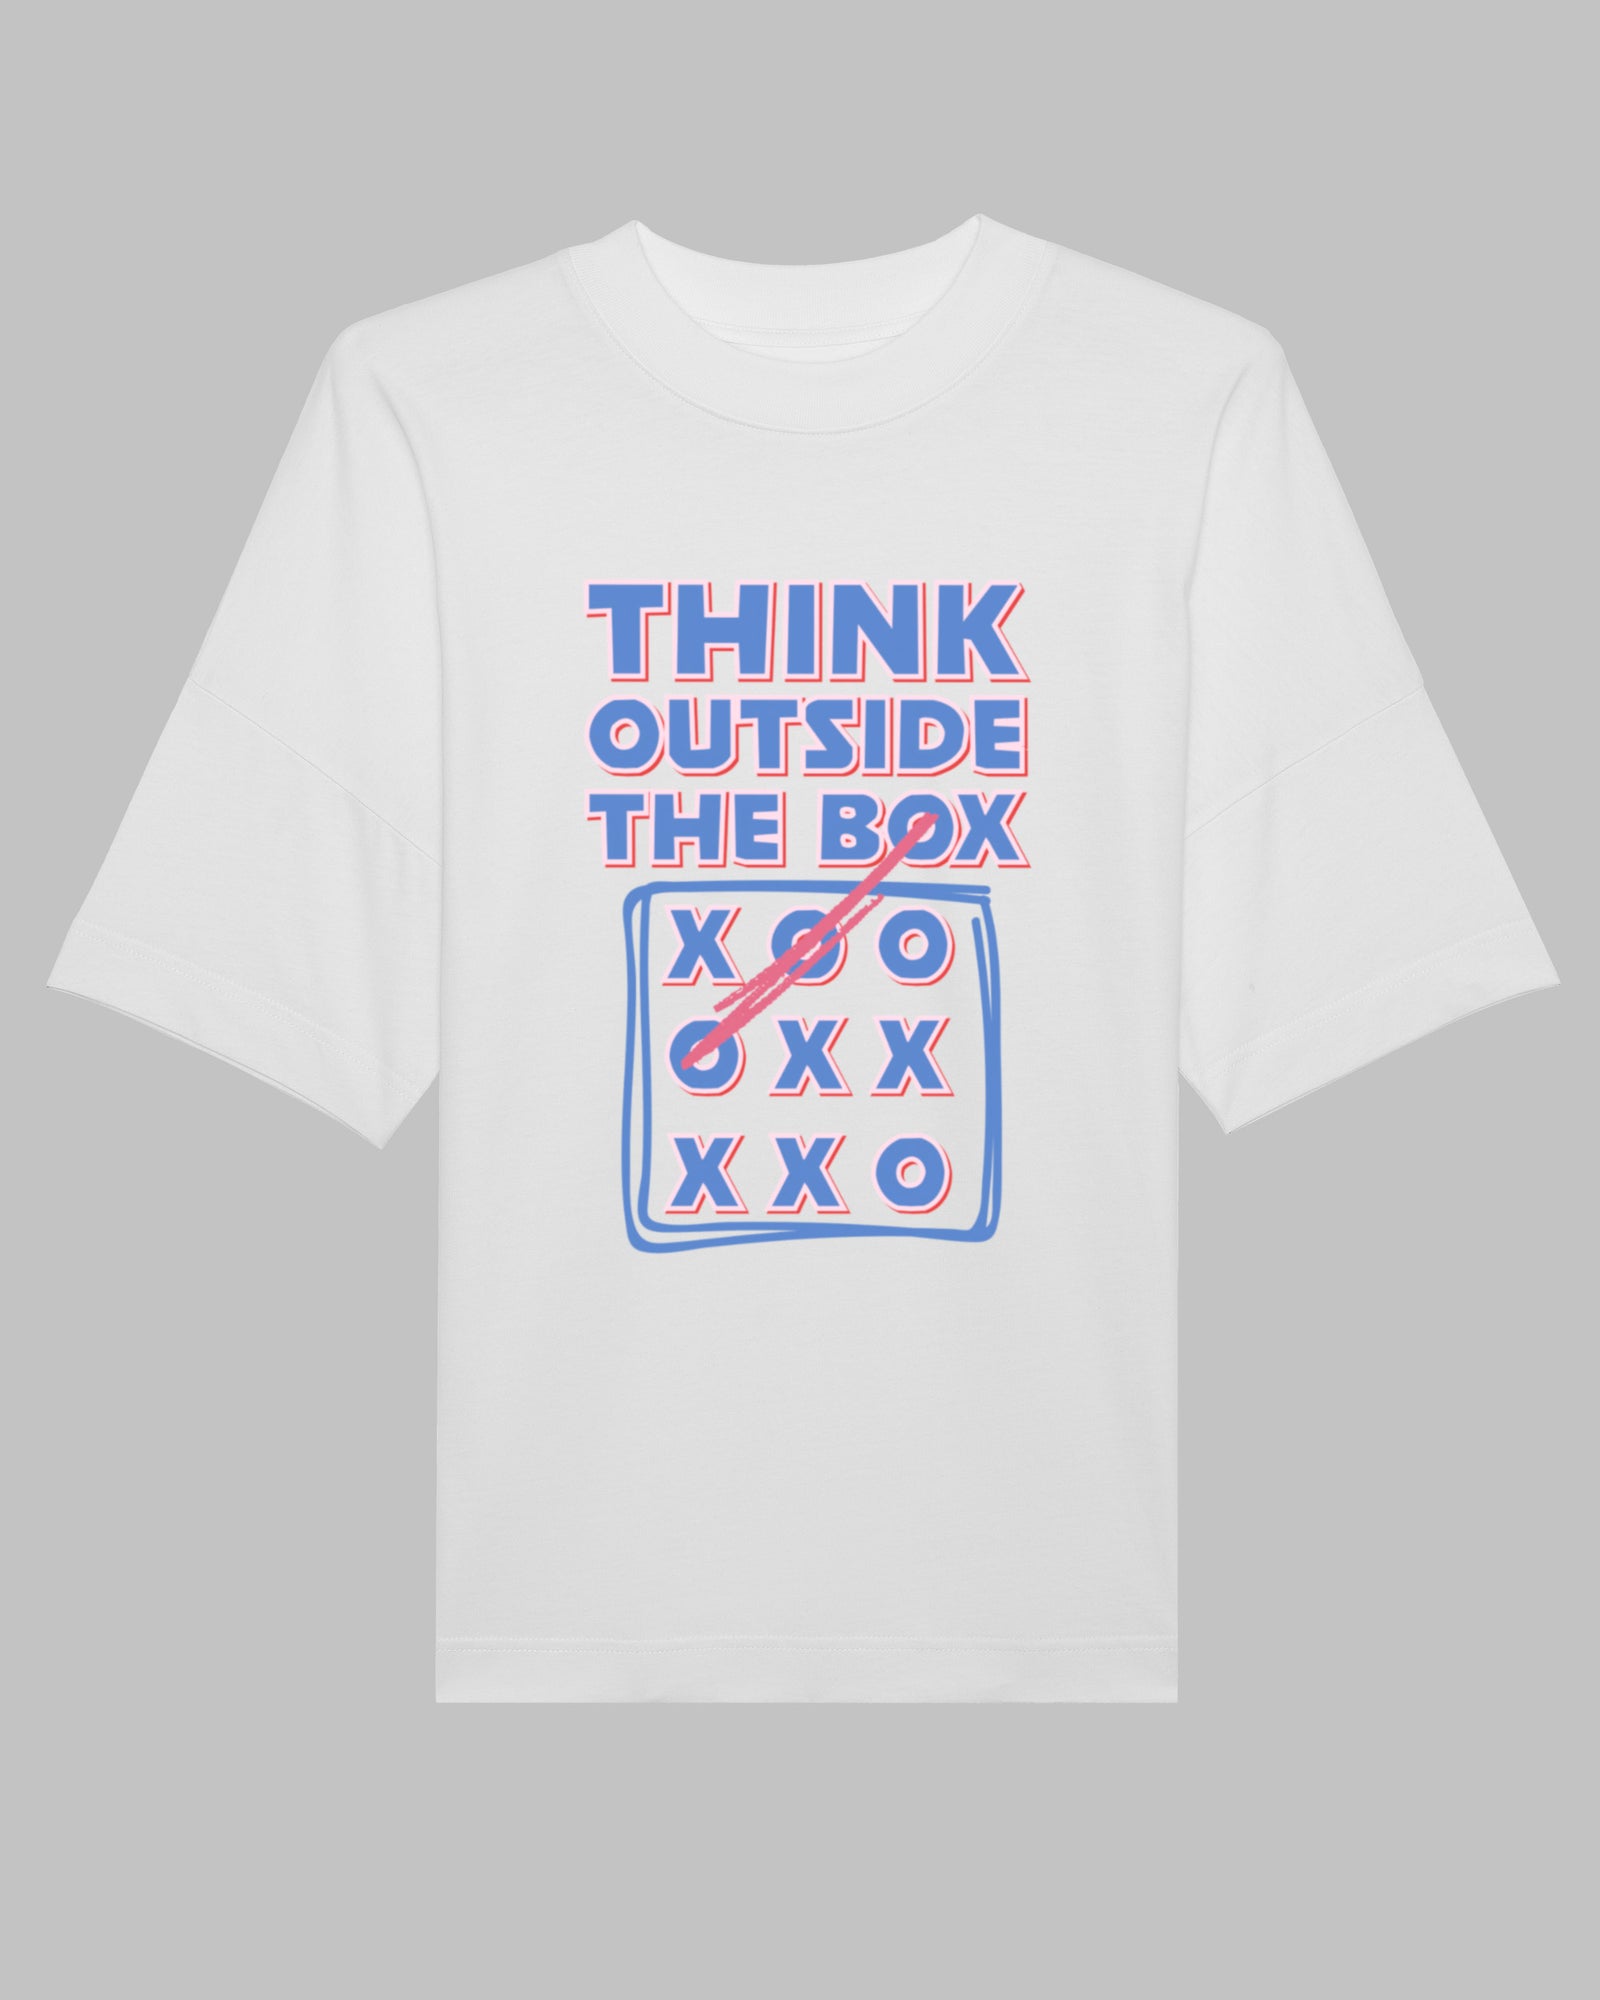 Think outside the box | 3-Style T-Shirt